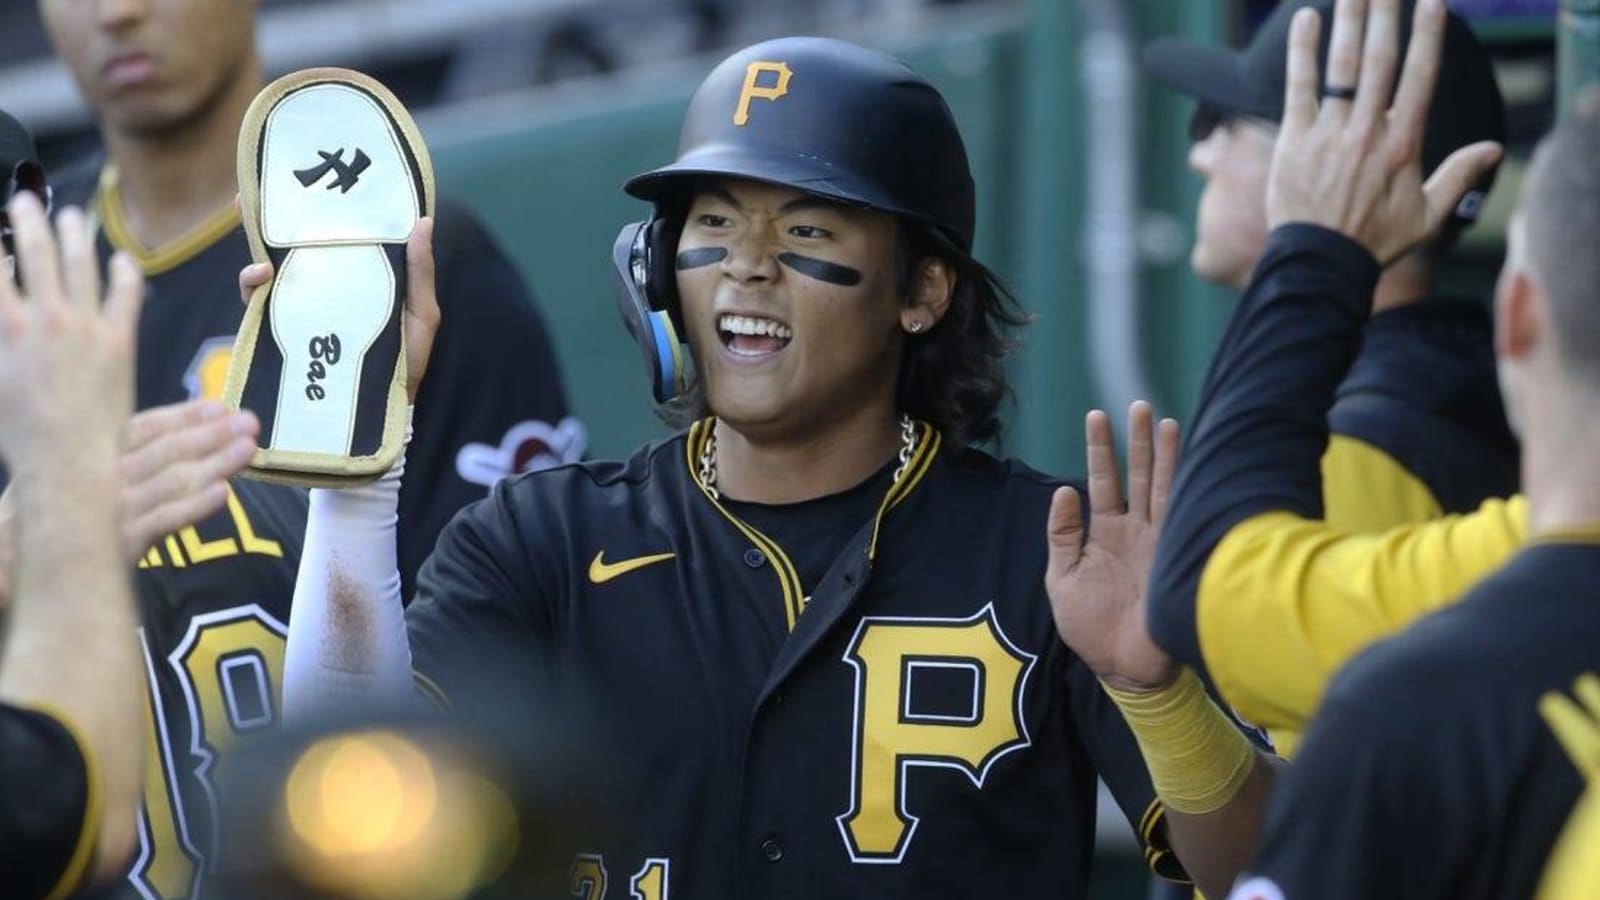 Pirates finish season on high note, upend Cardinals